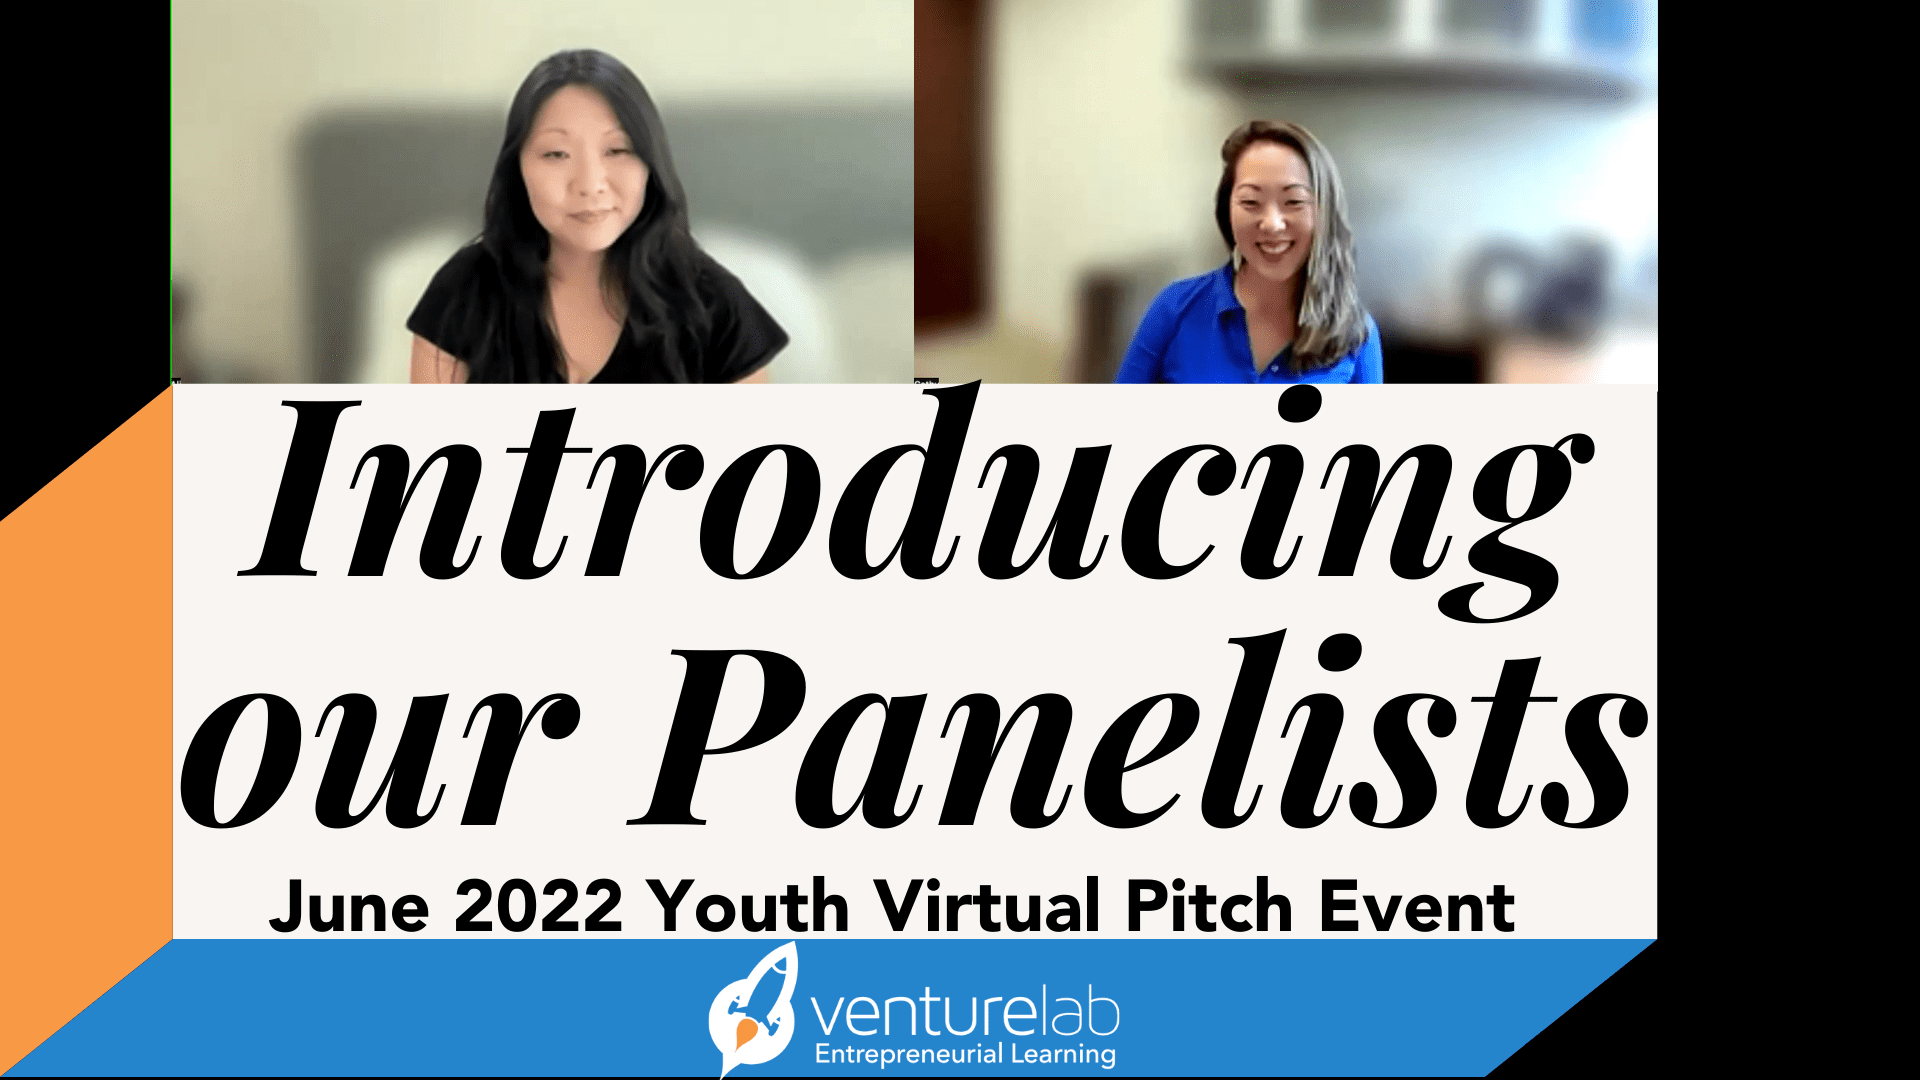 Youth pitch event volunteer panelists June 2022